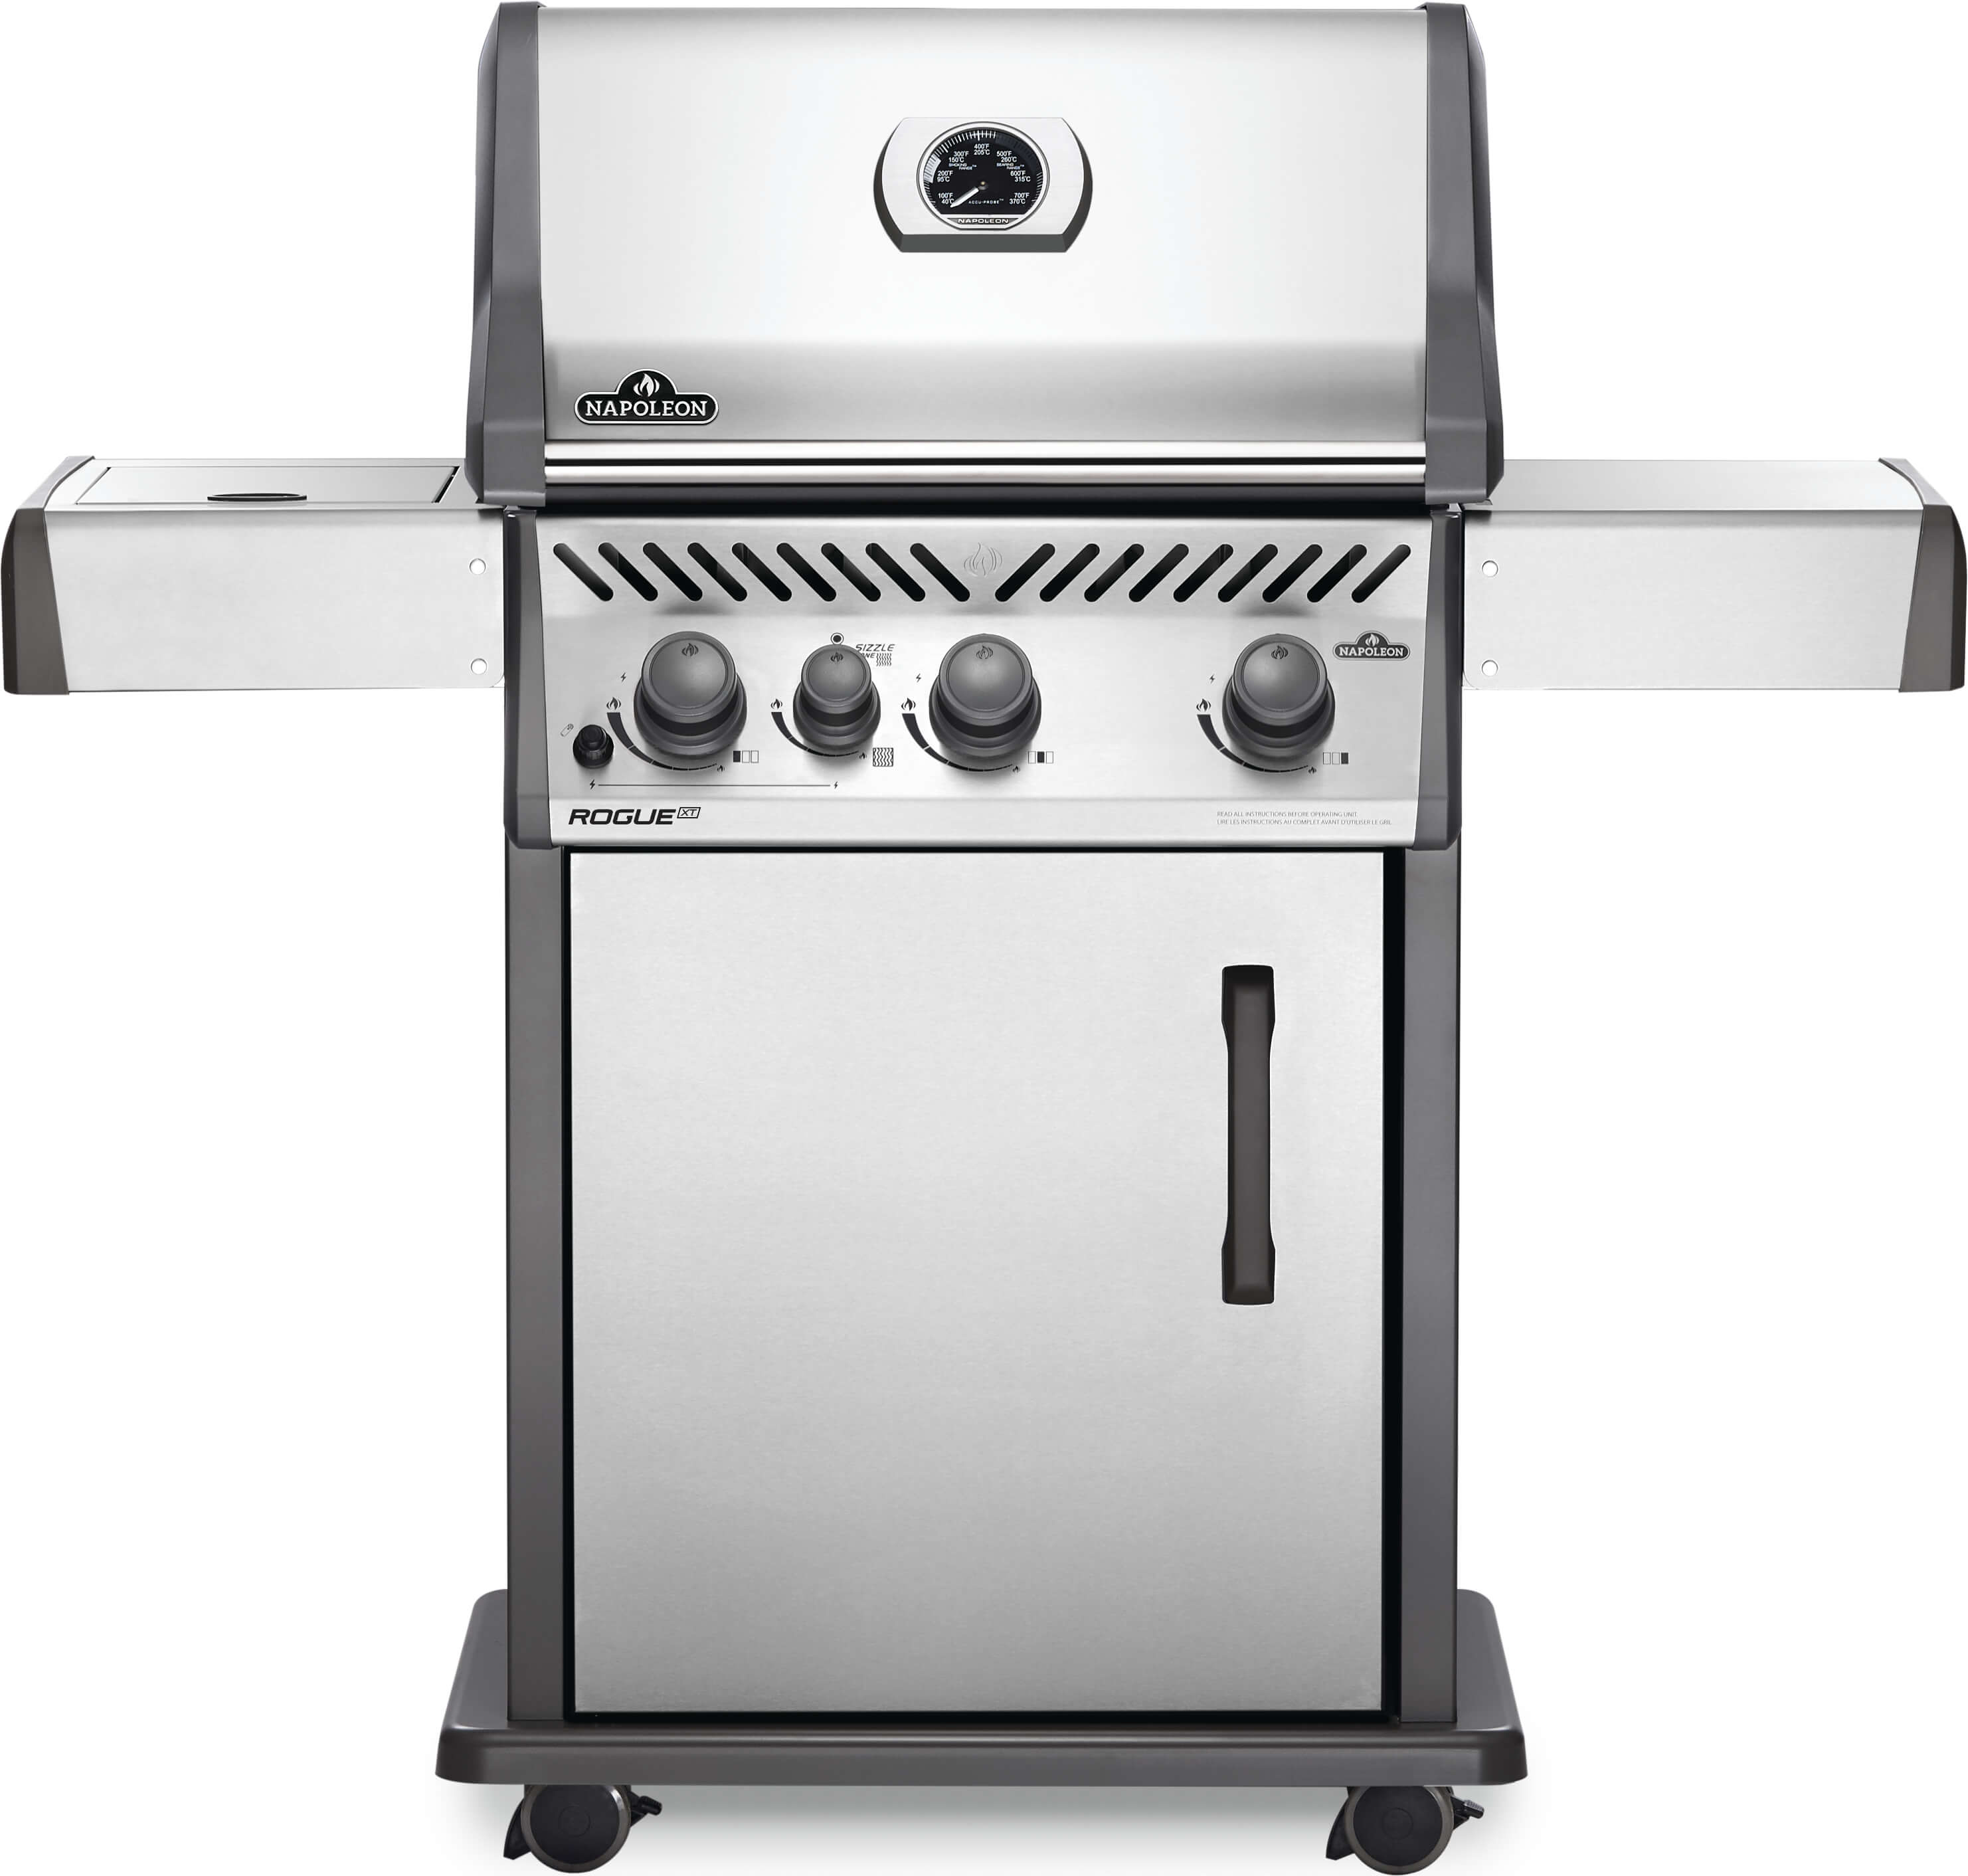 NAPOLEON Rogue XT Stainless Steel 3-Burner Propane Infrared Gas Grill with 1 Side Burner in the Gas Grills department at Lowes.com